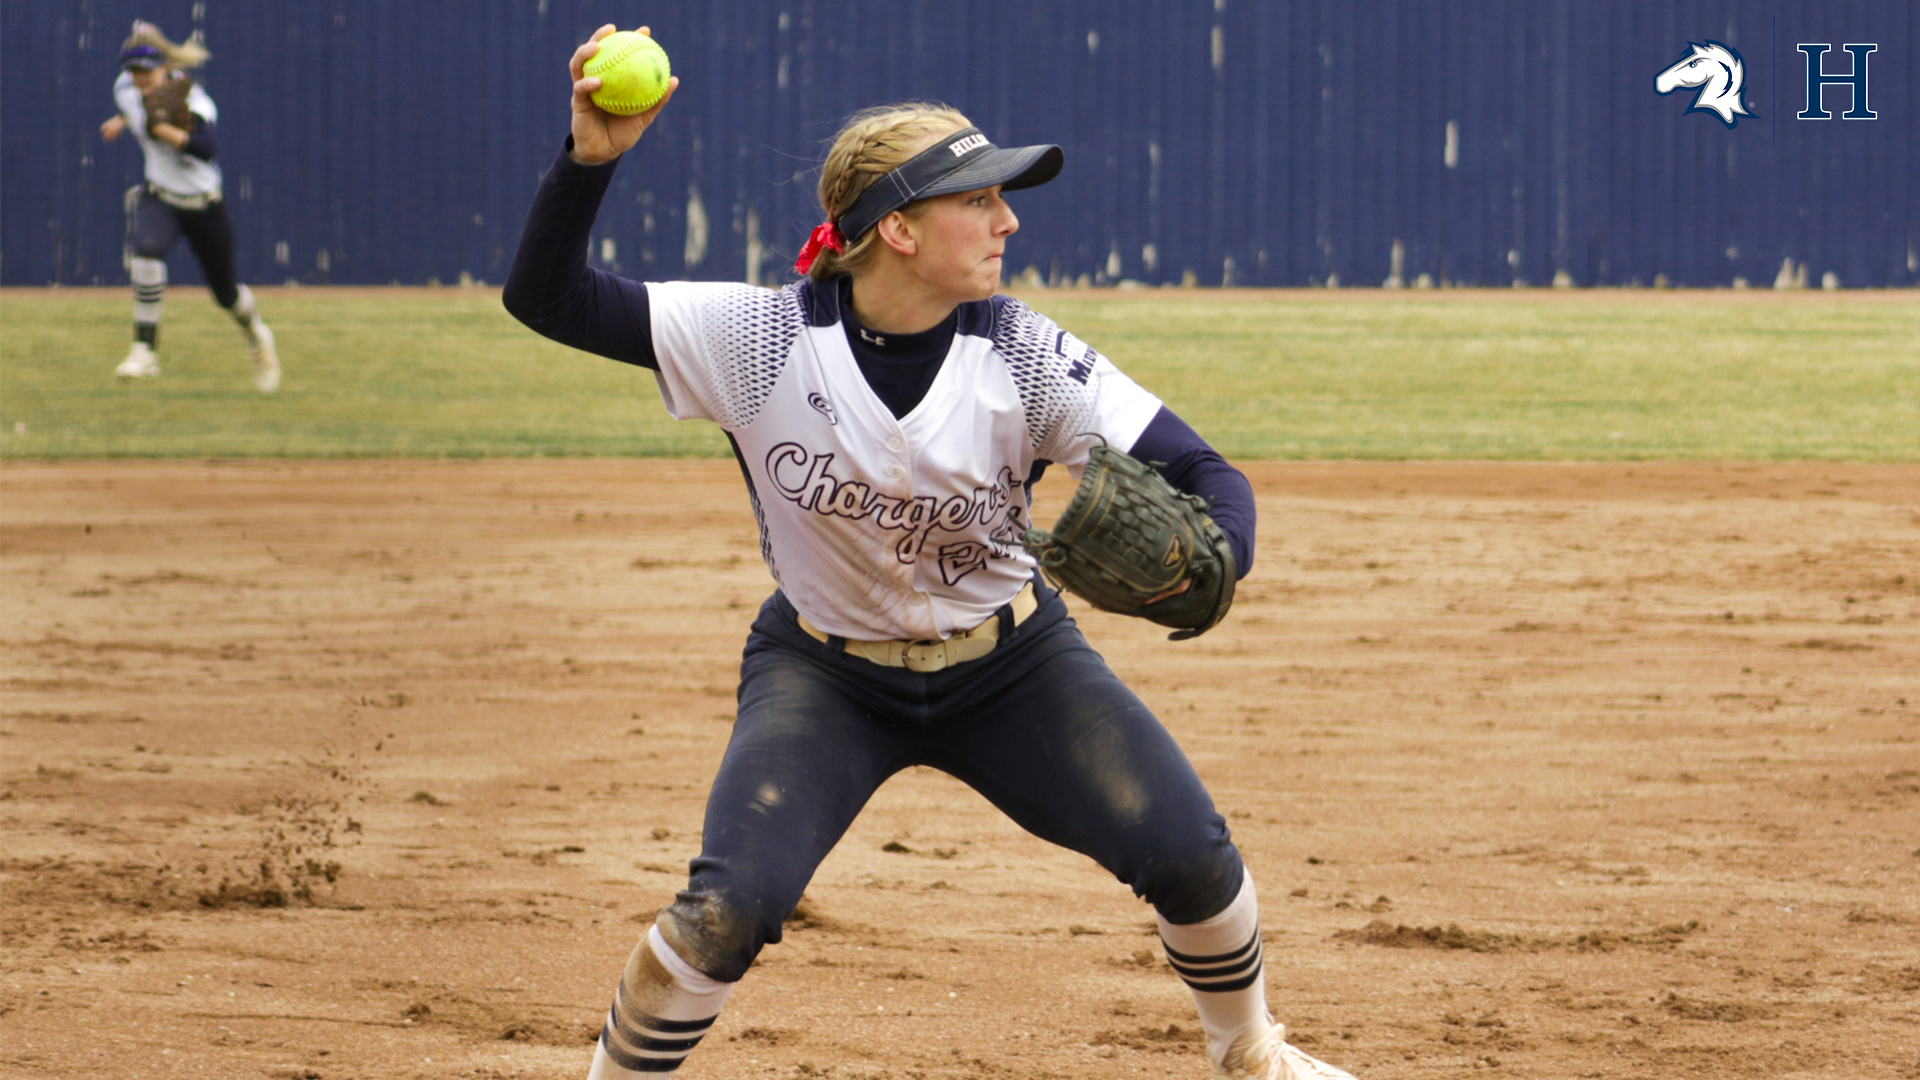 Chargers' Elaine Townley named G-MAC Softball Player of the Week (March 28-April 4)